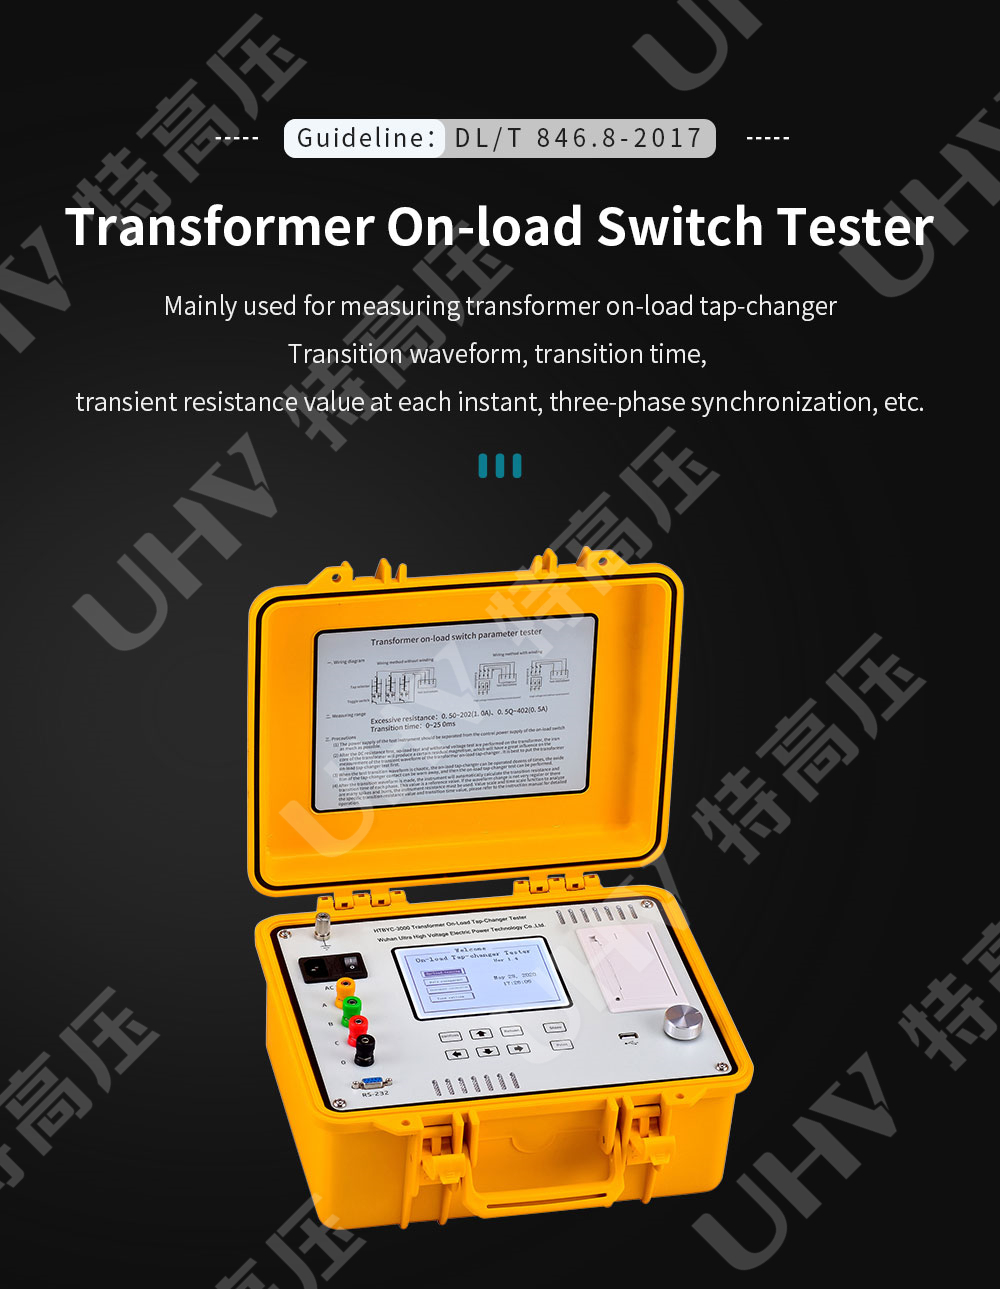 Transformer on-load tap switch tester